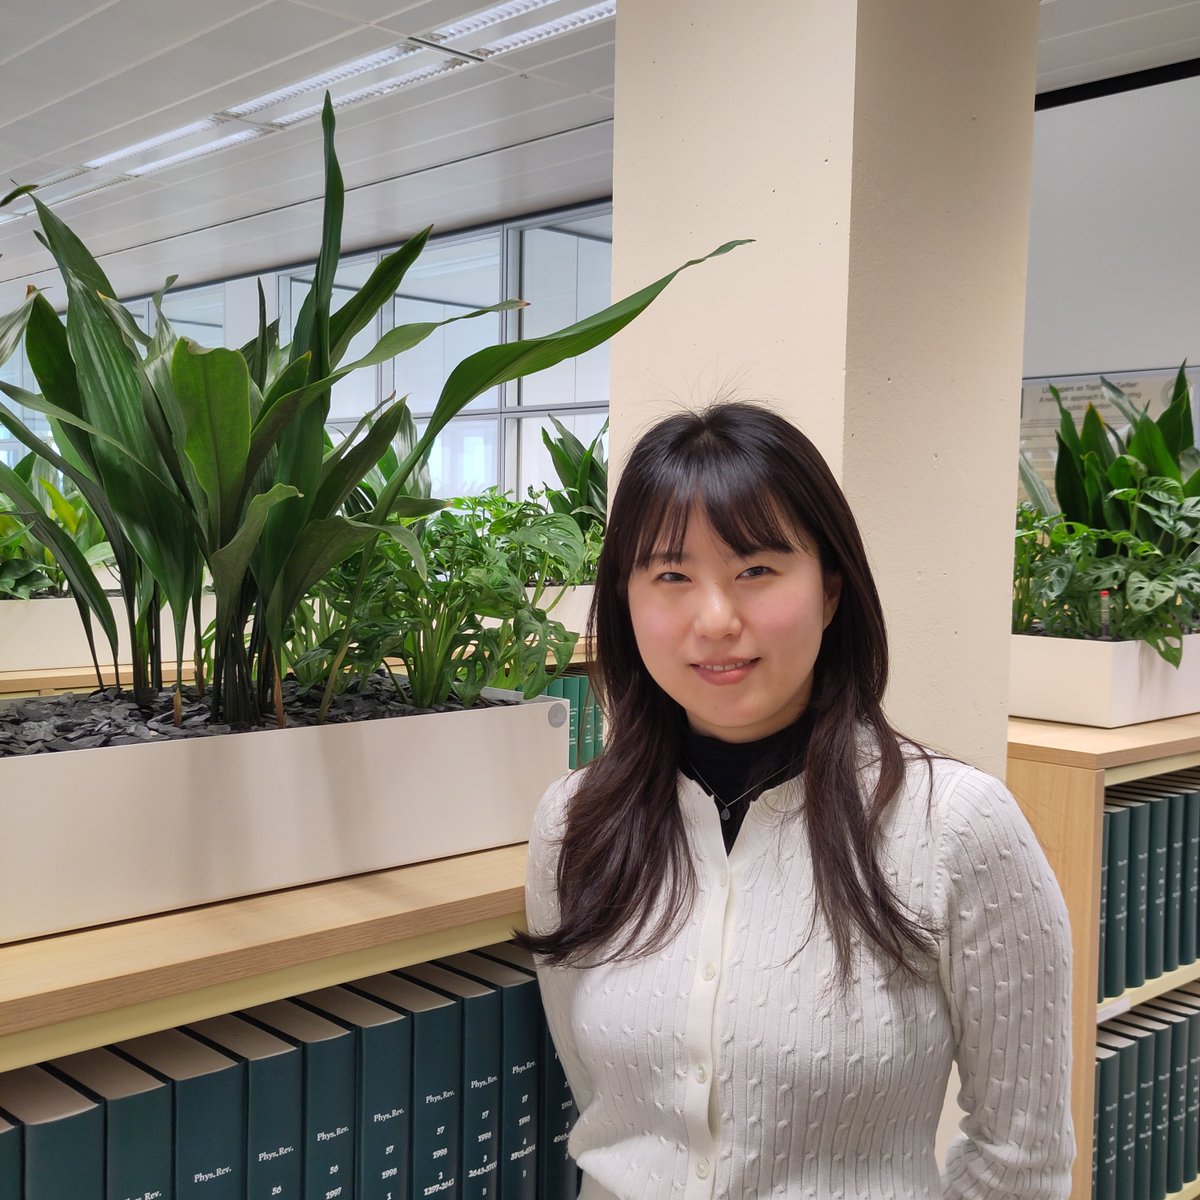 A big welcome to Youngseon Jeon 🇰🇷, a new PhD student in our group! She will work on the synthesis and characterization of new solid electrolytes. Have a great time! 🧪🎉